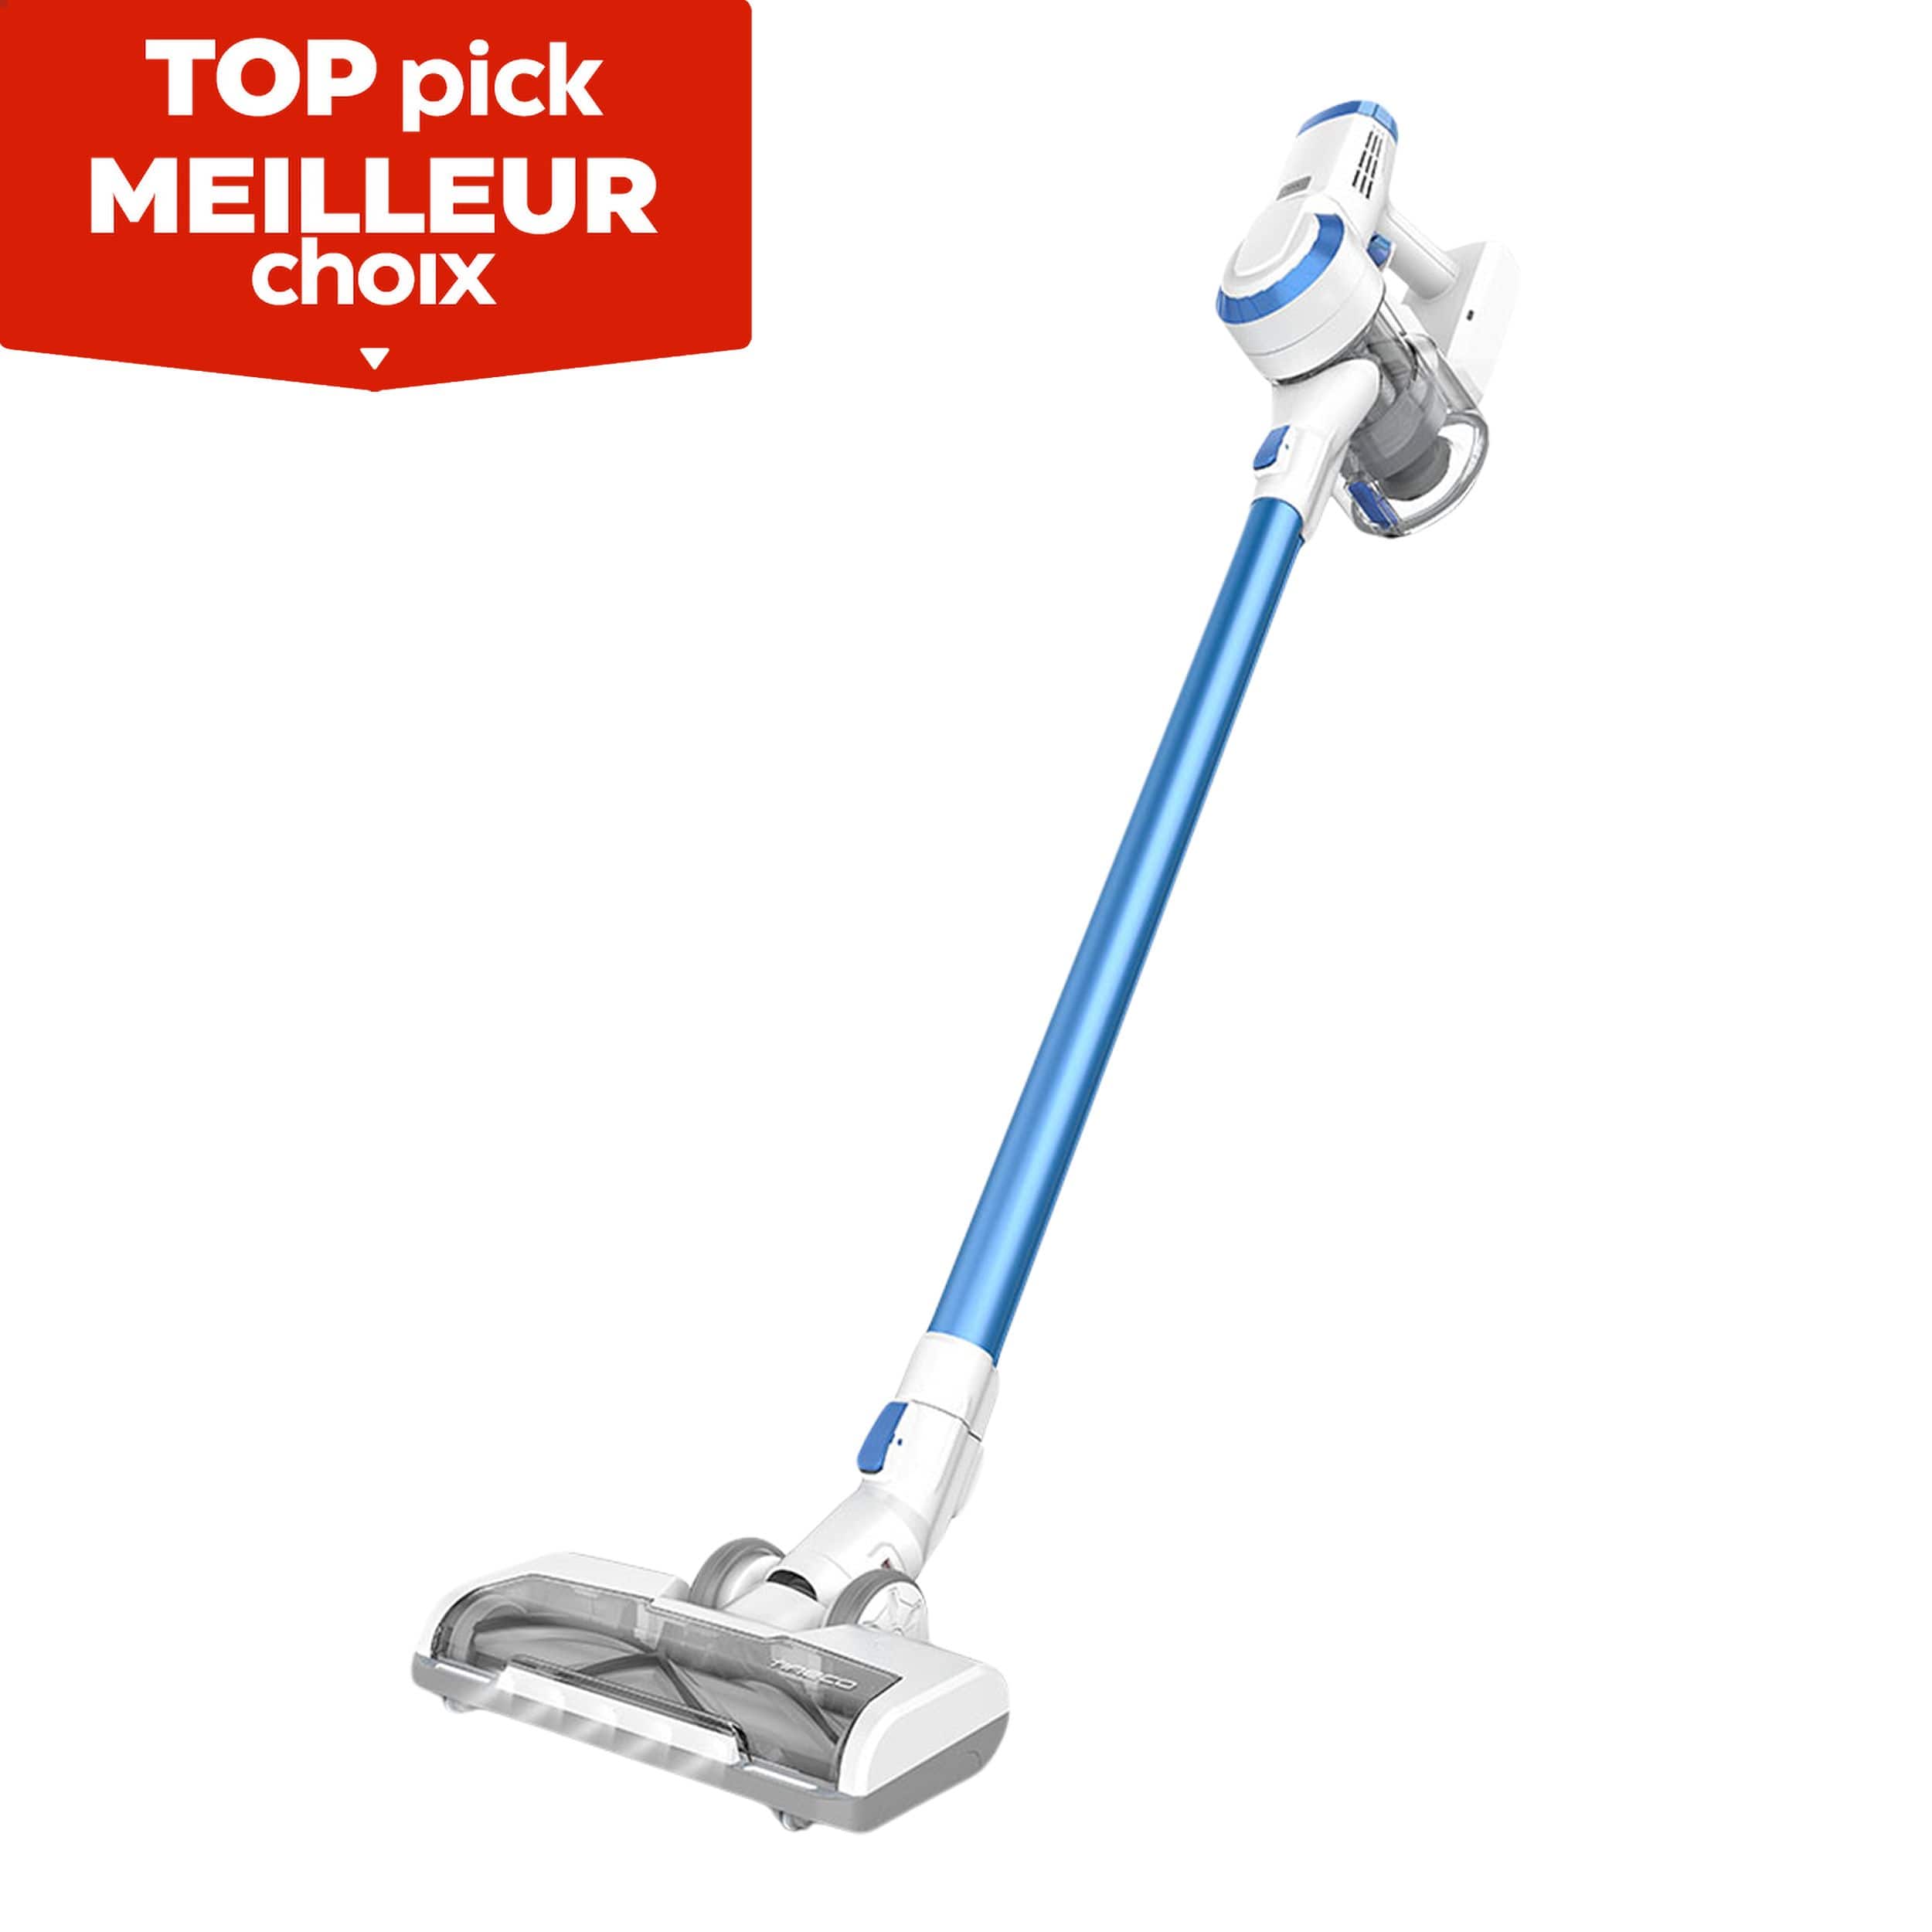 Tineco PURE ONE X Tango Smart Cordless Lightweight Stick Vacuum Cleaner  with 2 Full Size Brush Heads for Hard Floors and Carpet 